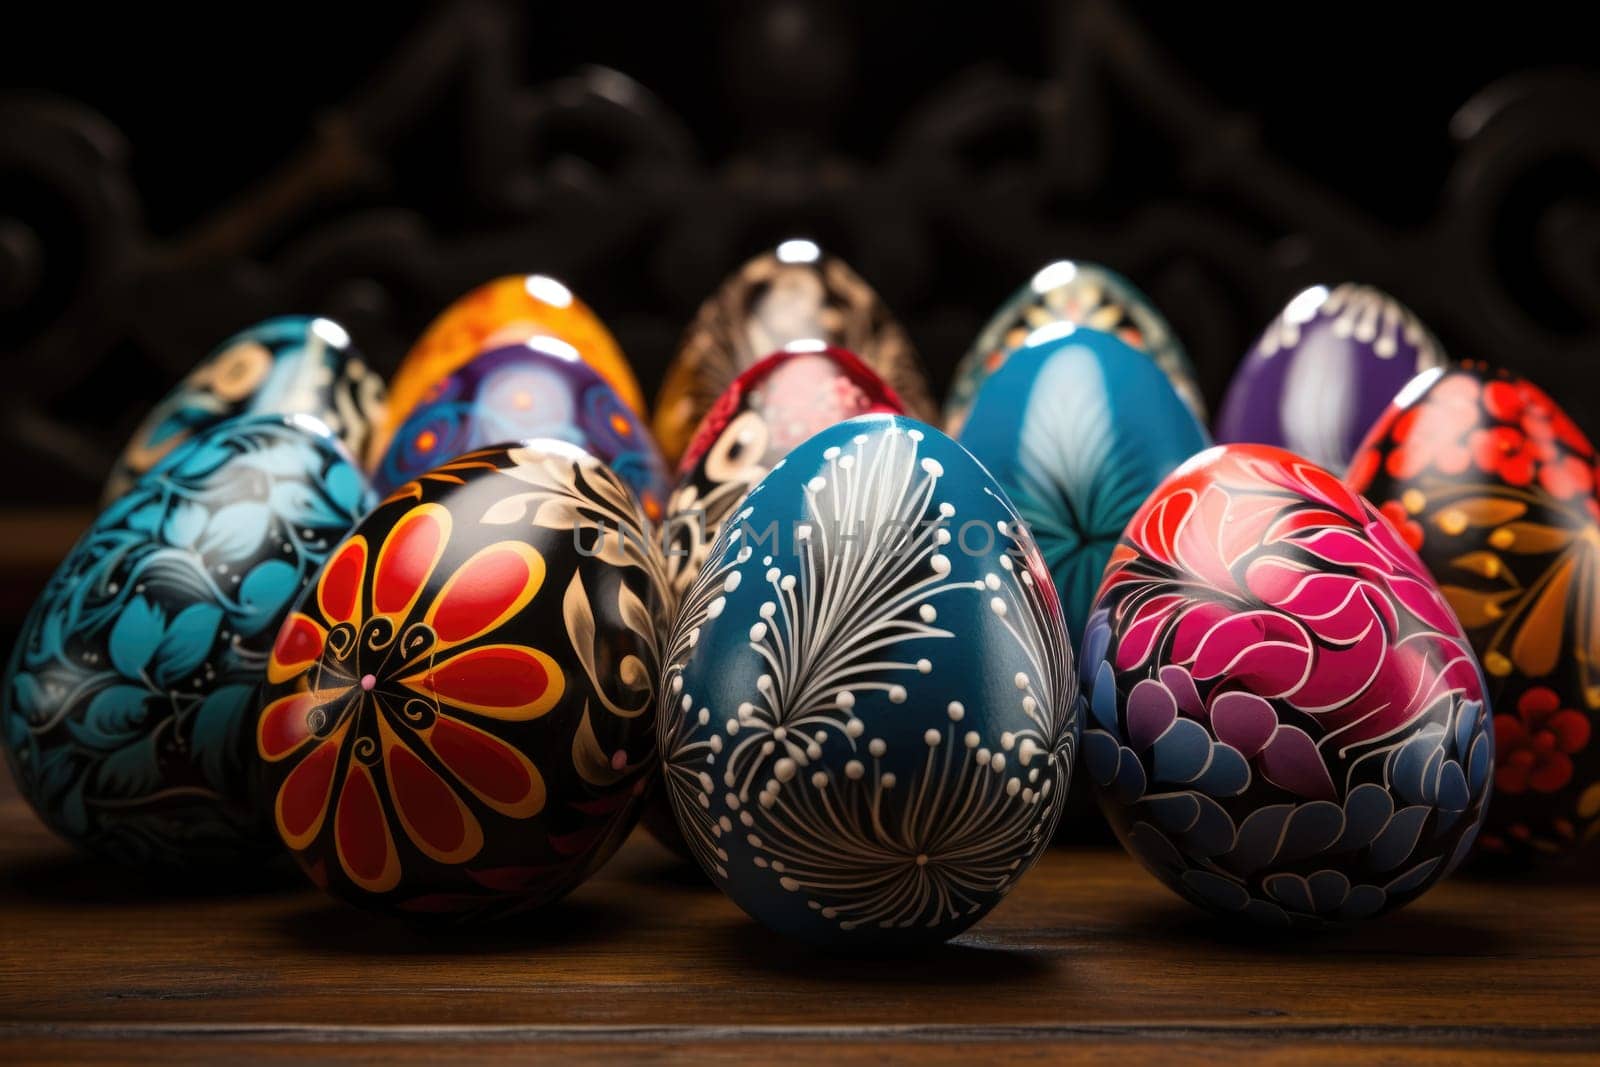 A group of vibrant hand-painted Easter eggs displayed on a wooden table.